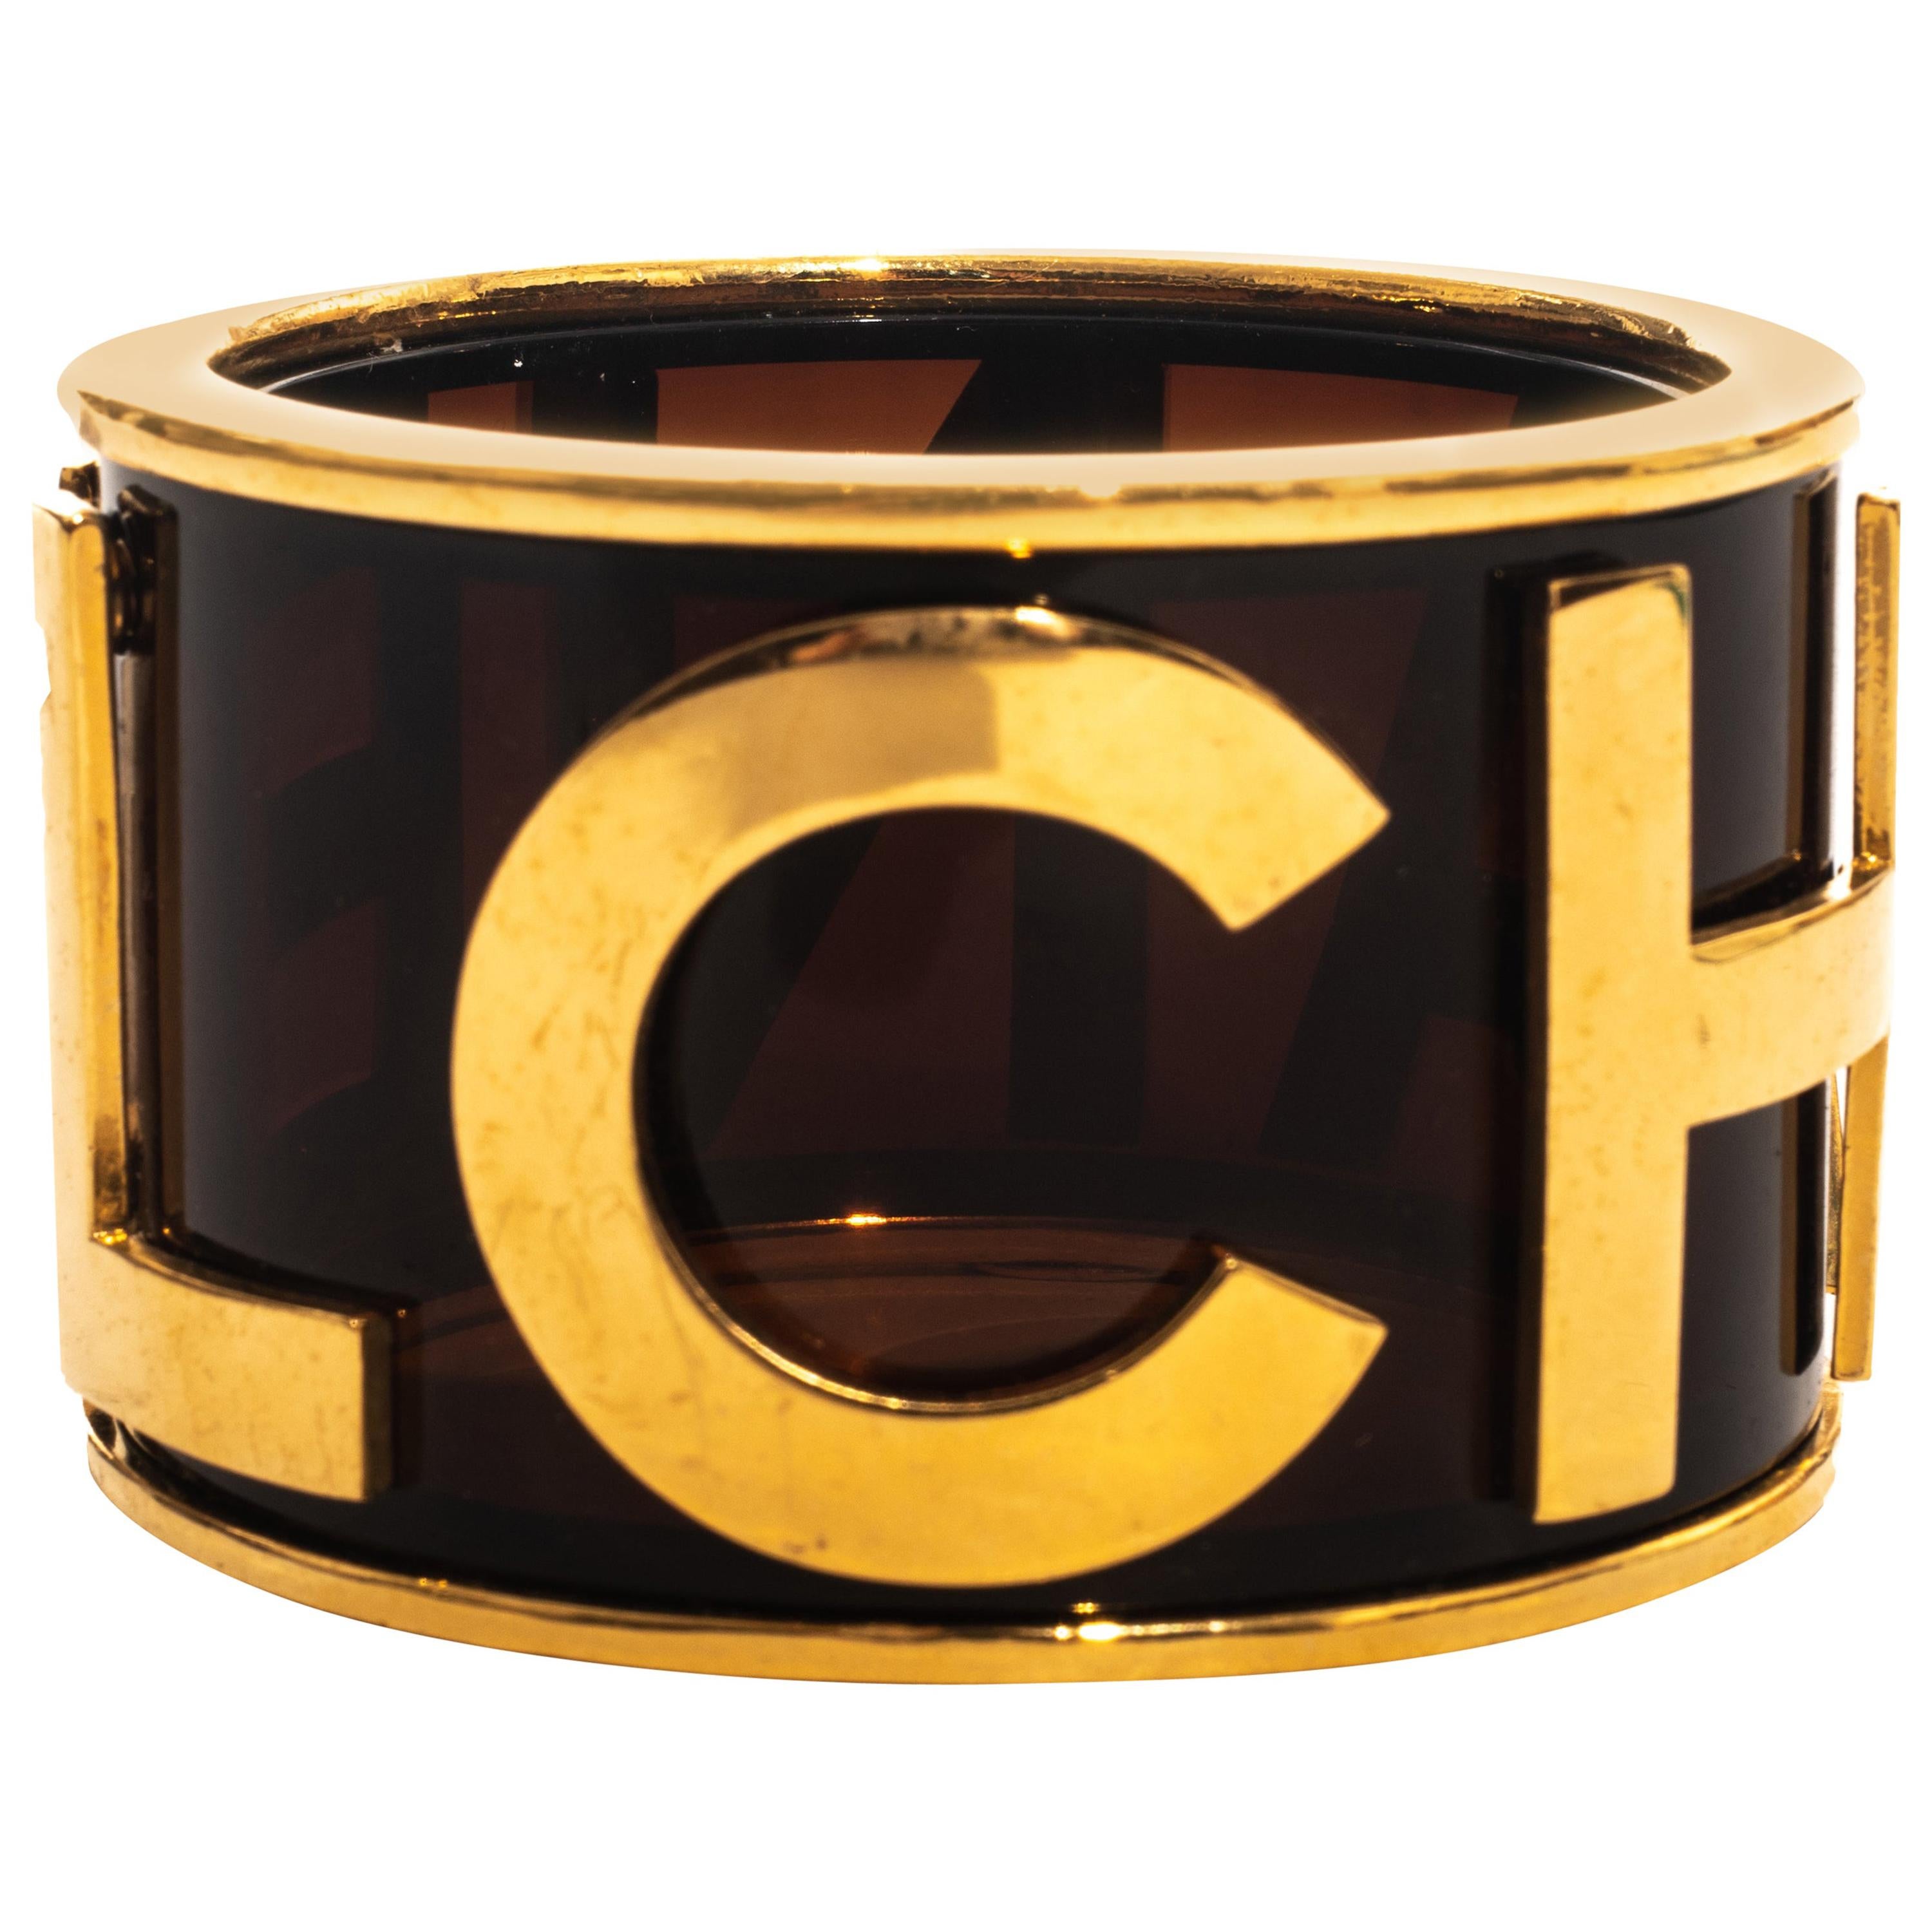 Chanel by Karl Lagerfeld gold plated lucite bangle bracelet, ss 1990